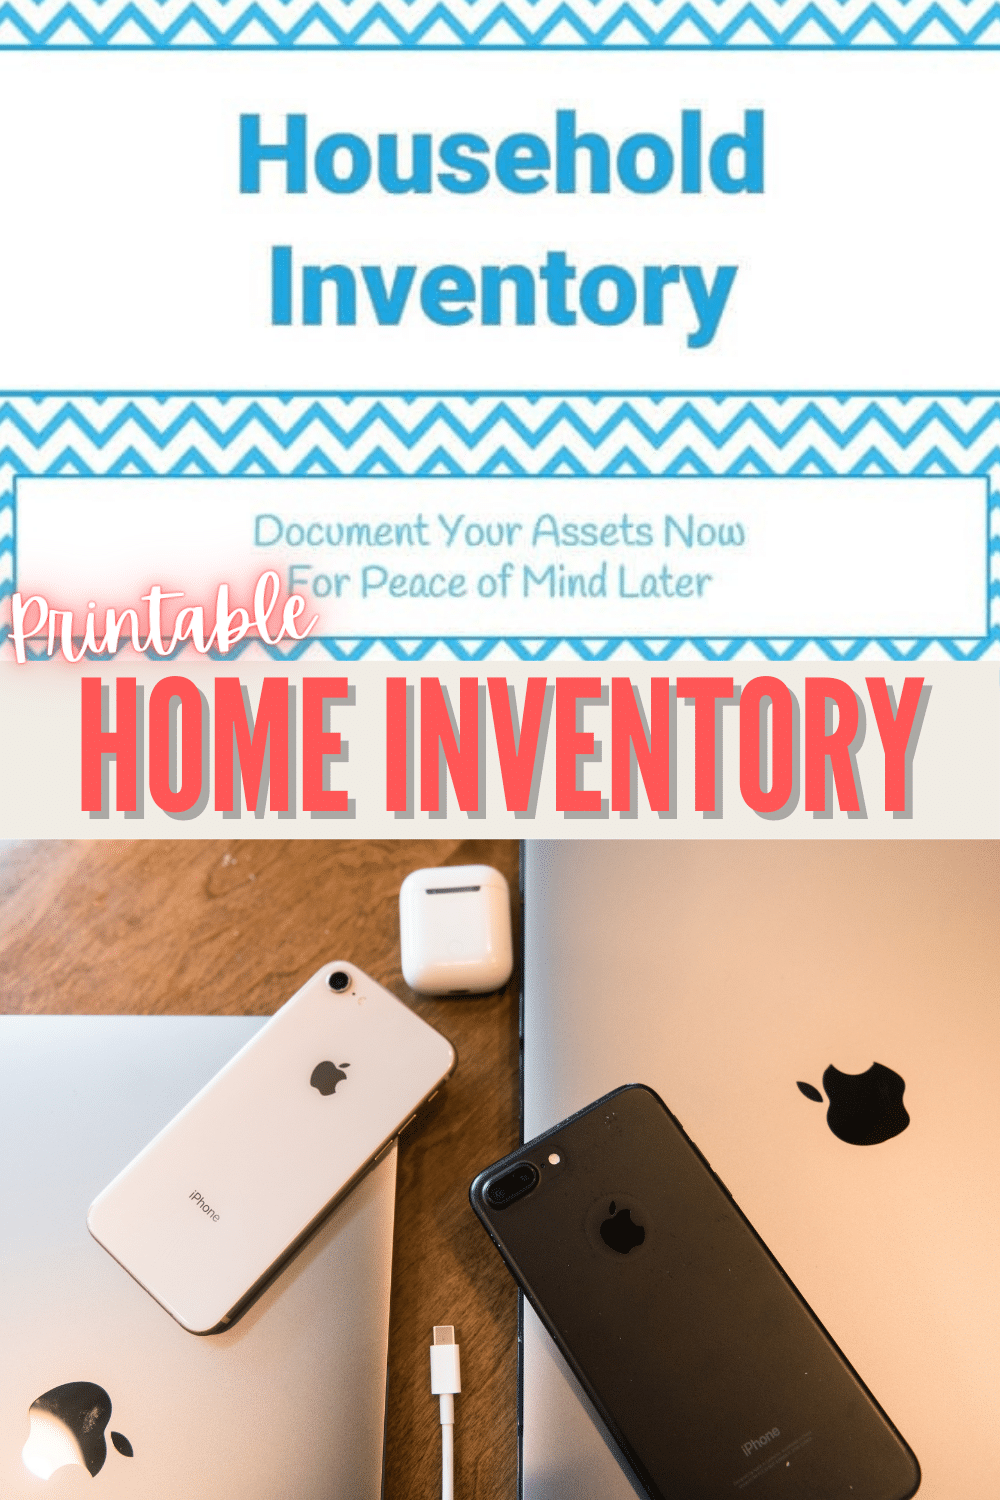 A huge 30+ page home inventory printable to help make cataloging your possessions easy. This printable household inventory packet covers every room. #printable #homeinventory #householdinventory via @wondermomwannab